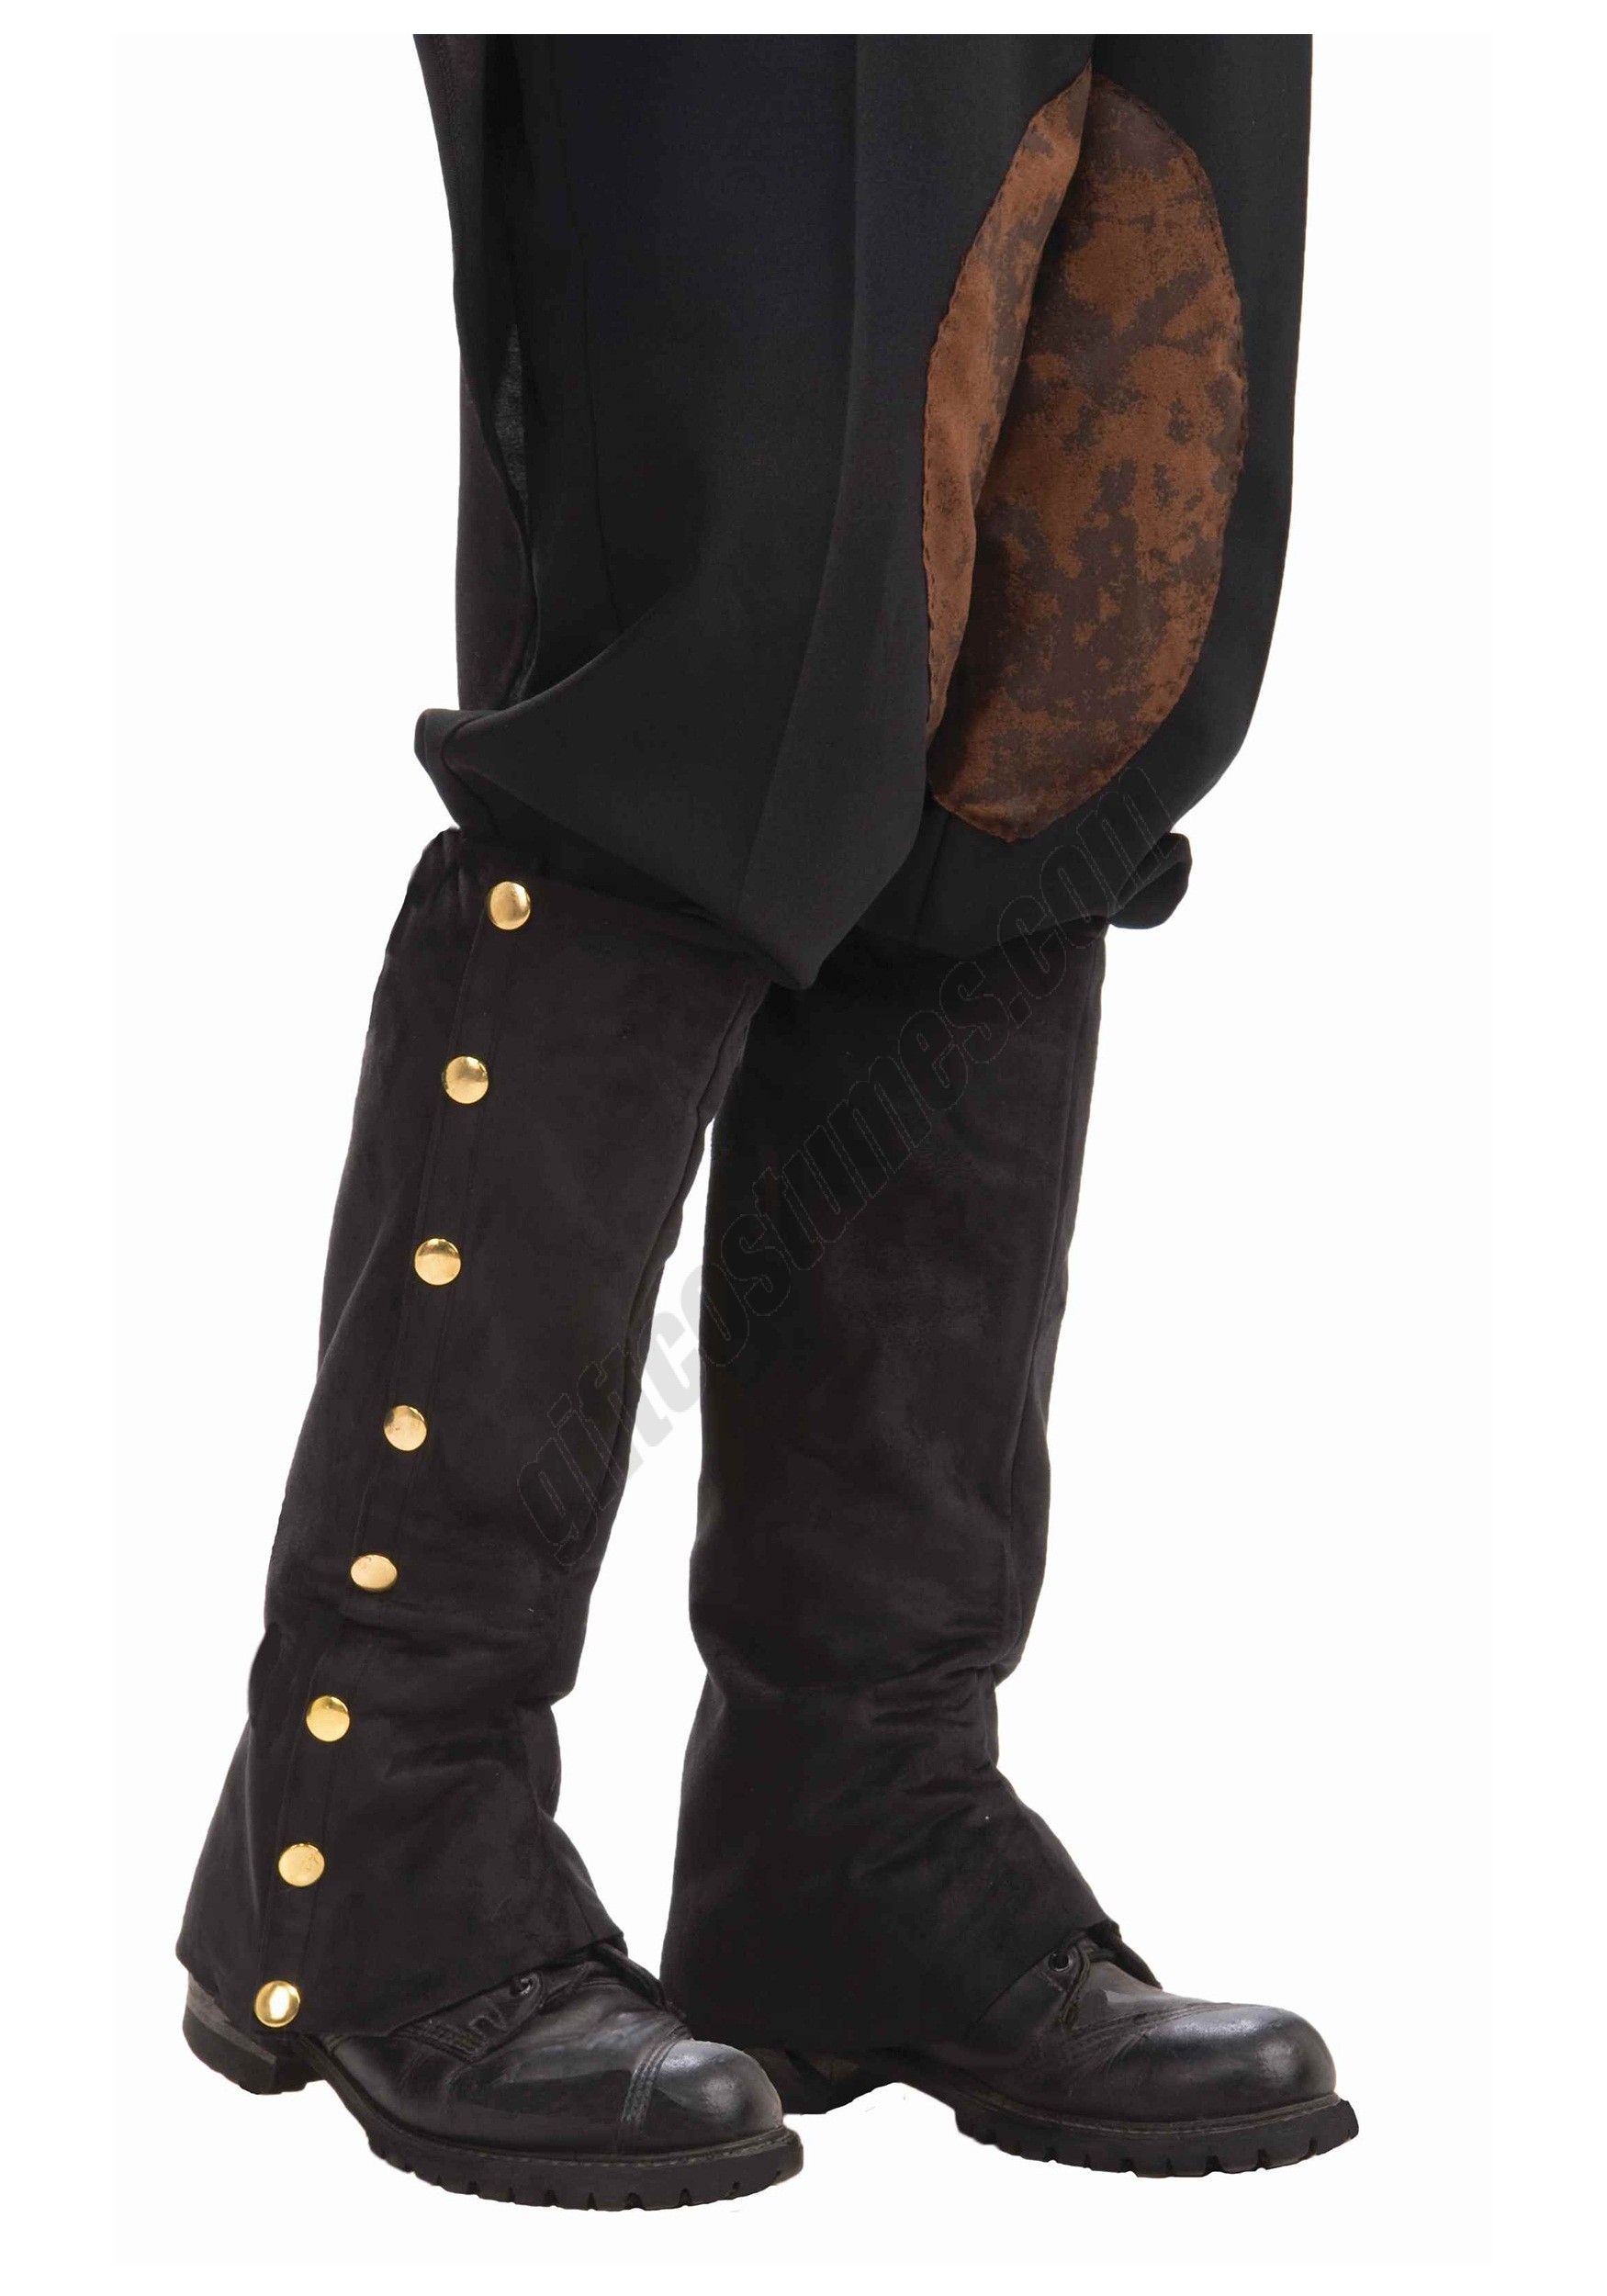 Steampunk Black Suede Spats Promotions - Steampunk Black Suede Spats Promotions